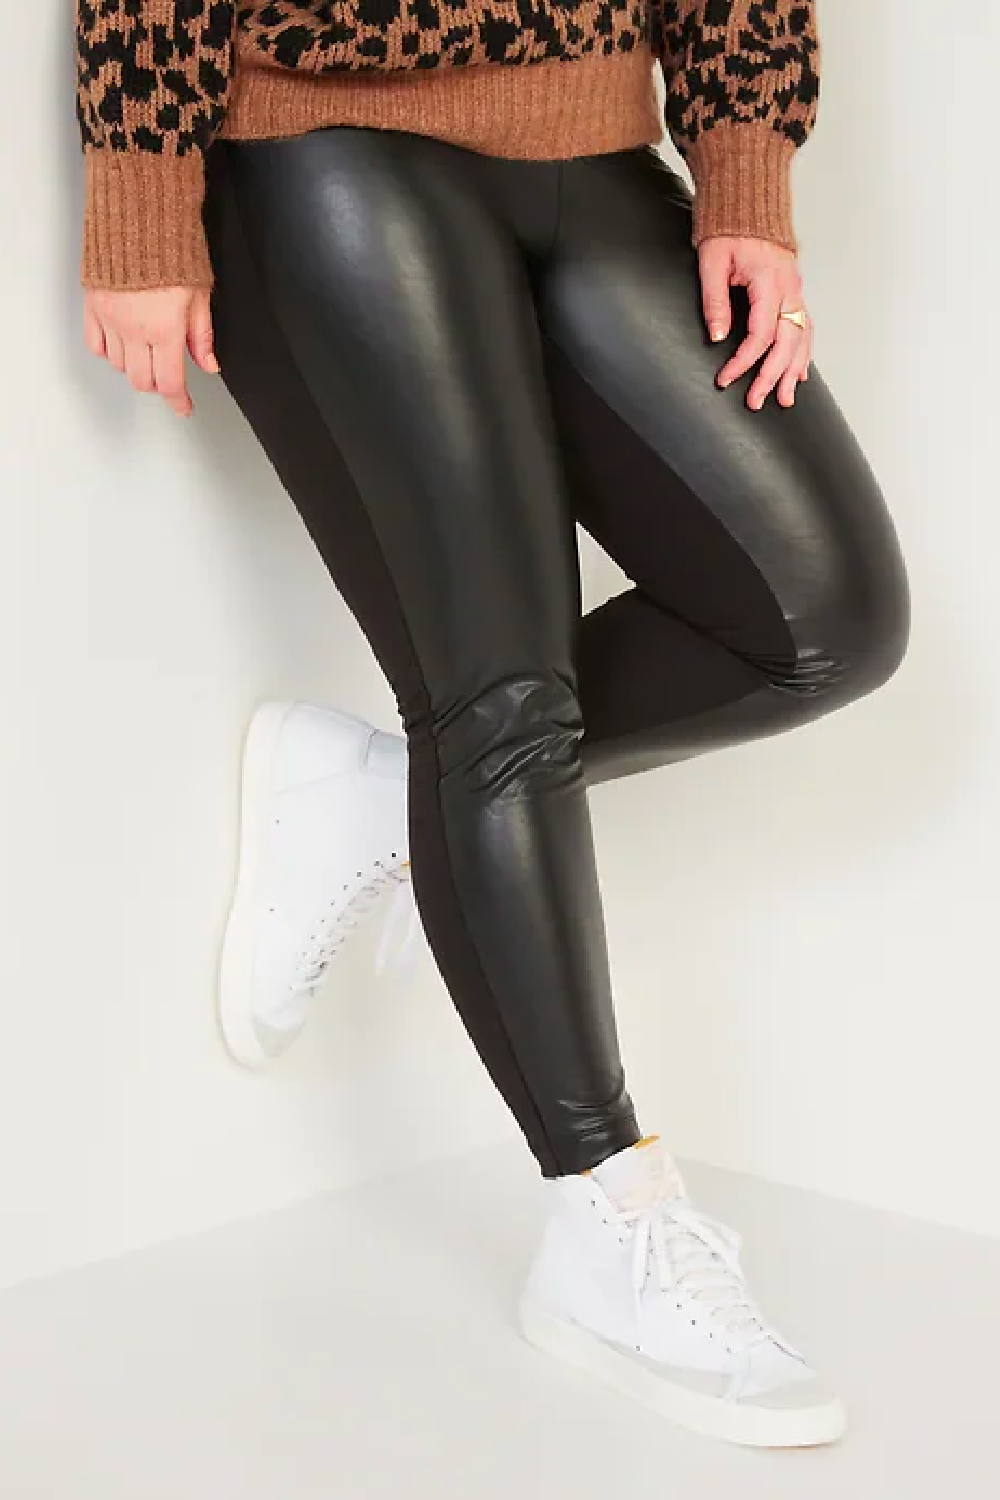 CLIV Womens Faux Leather Leggings Stretch High Waisted Leather Tights for  Women (NylonBK,XS) Chic Black at Amazon Women's Clothing store